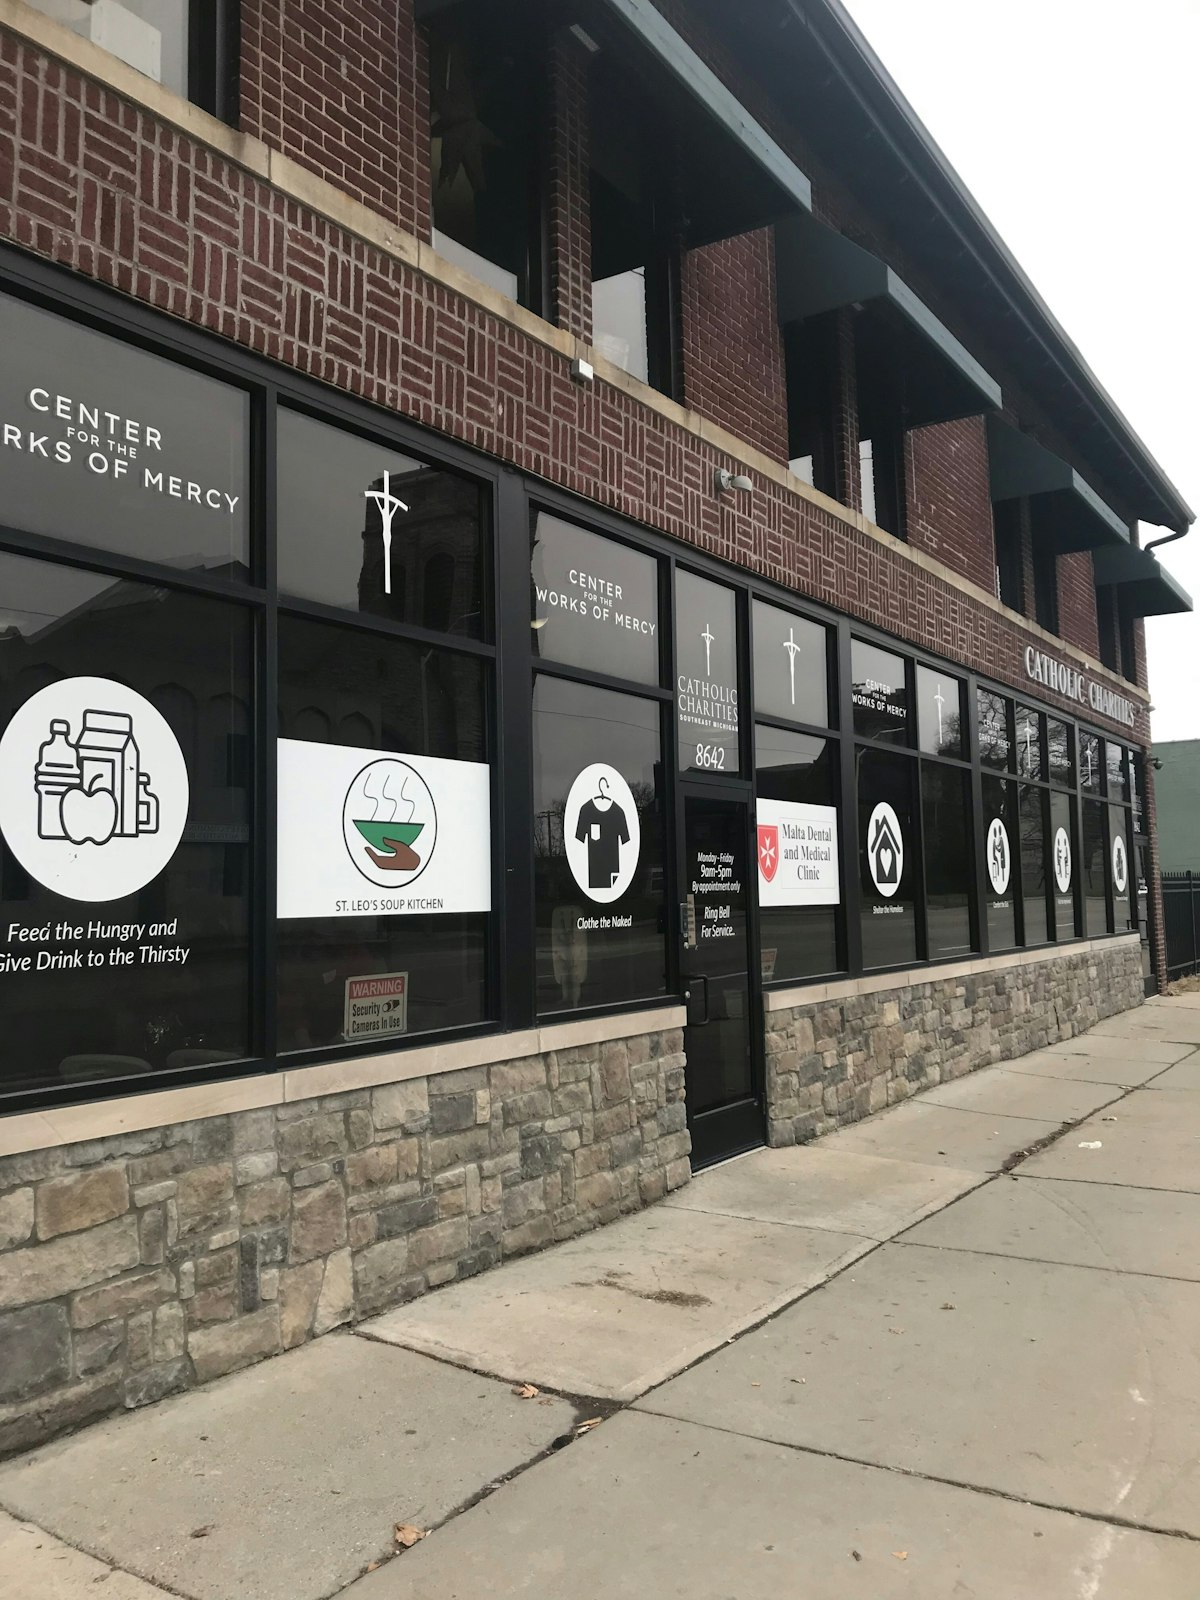 The Center for the Works of Mercy on Woodward Avenue, operated by Catholic Charities of Southeast Michigan, also includes mental health and addiction counseling, a jail and prison ministry, clothing, dental, medical and vision services for the low income and uninsured.